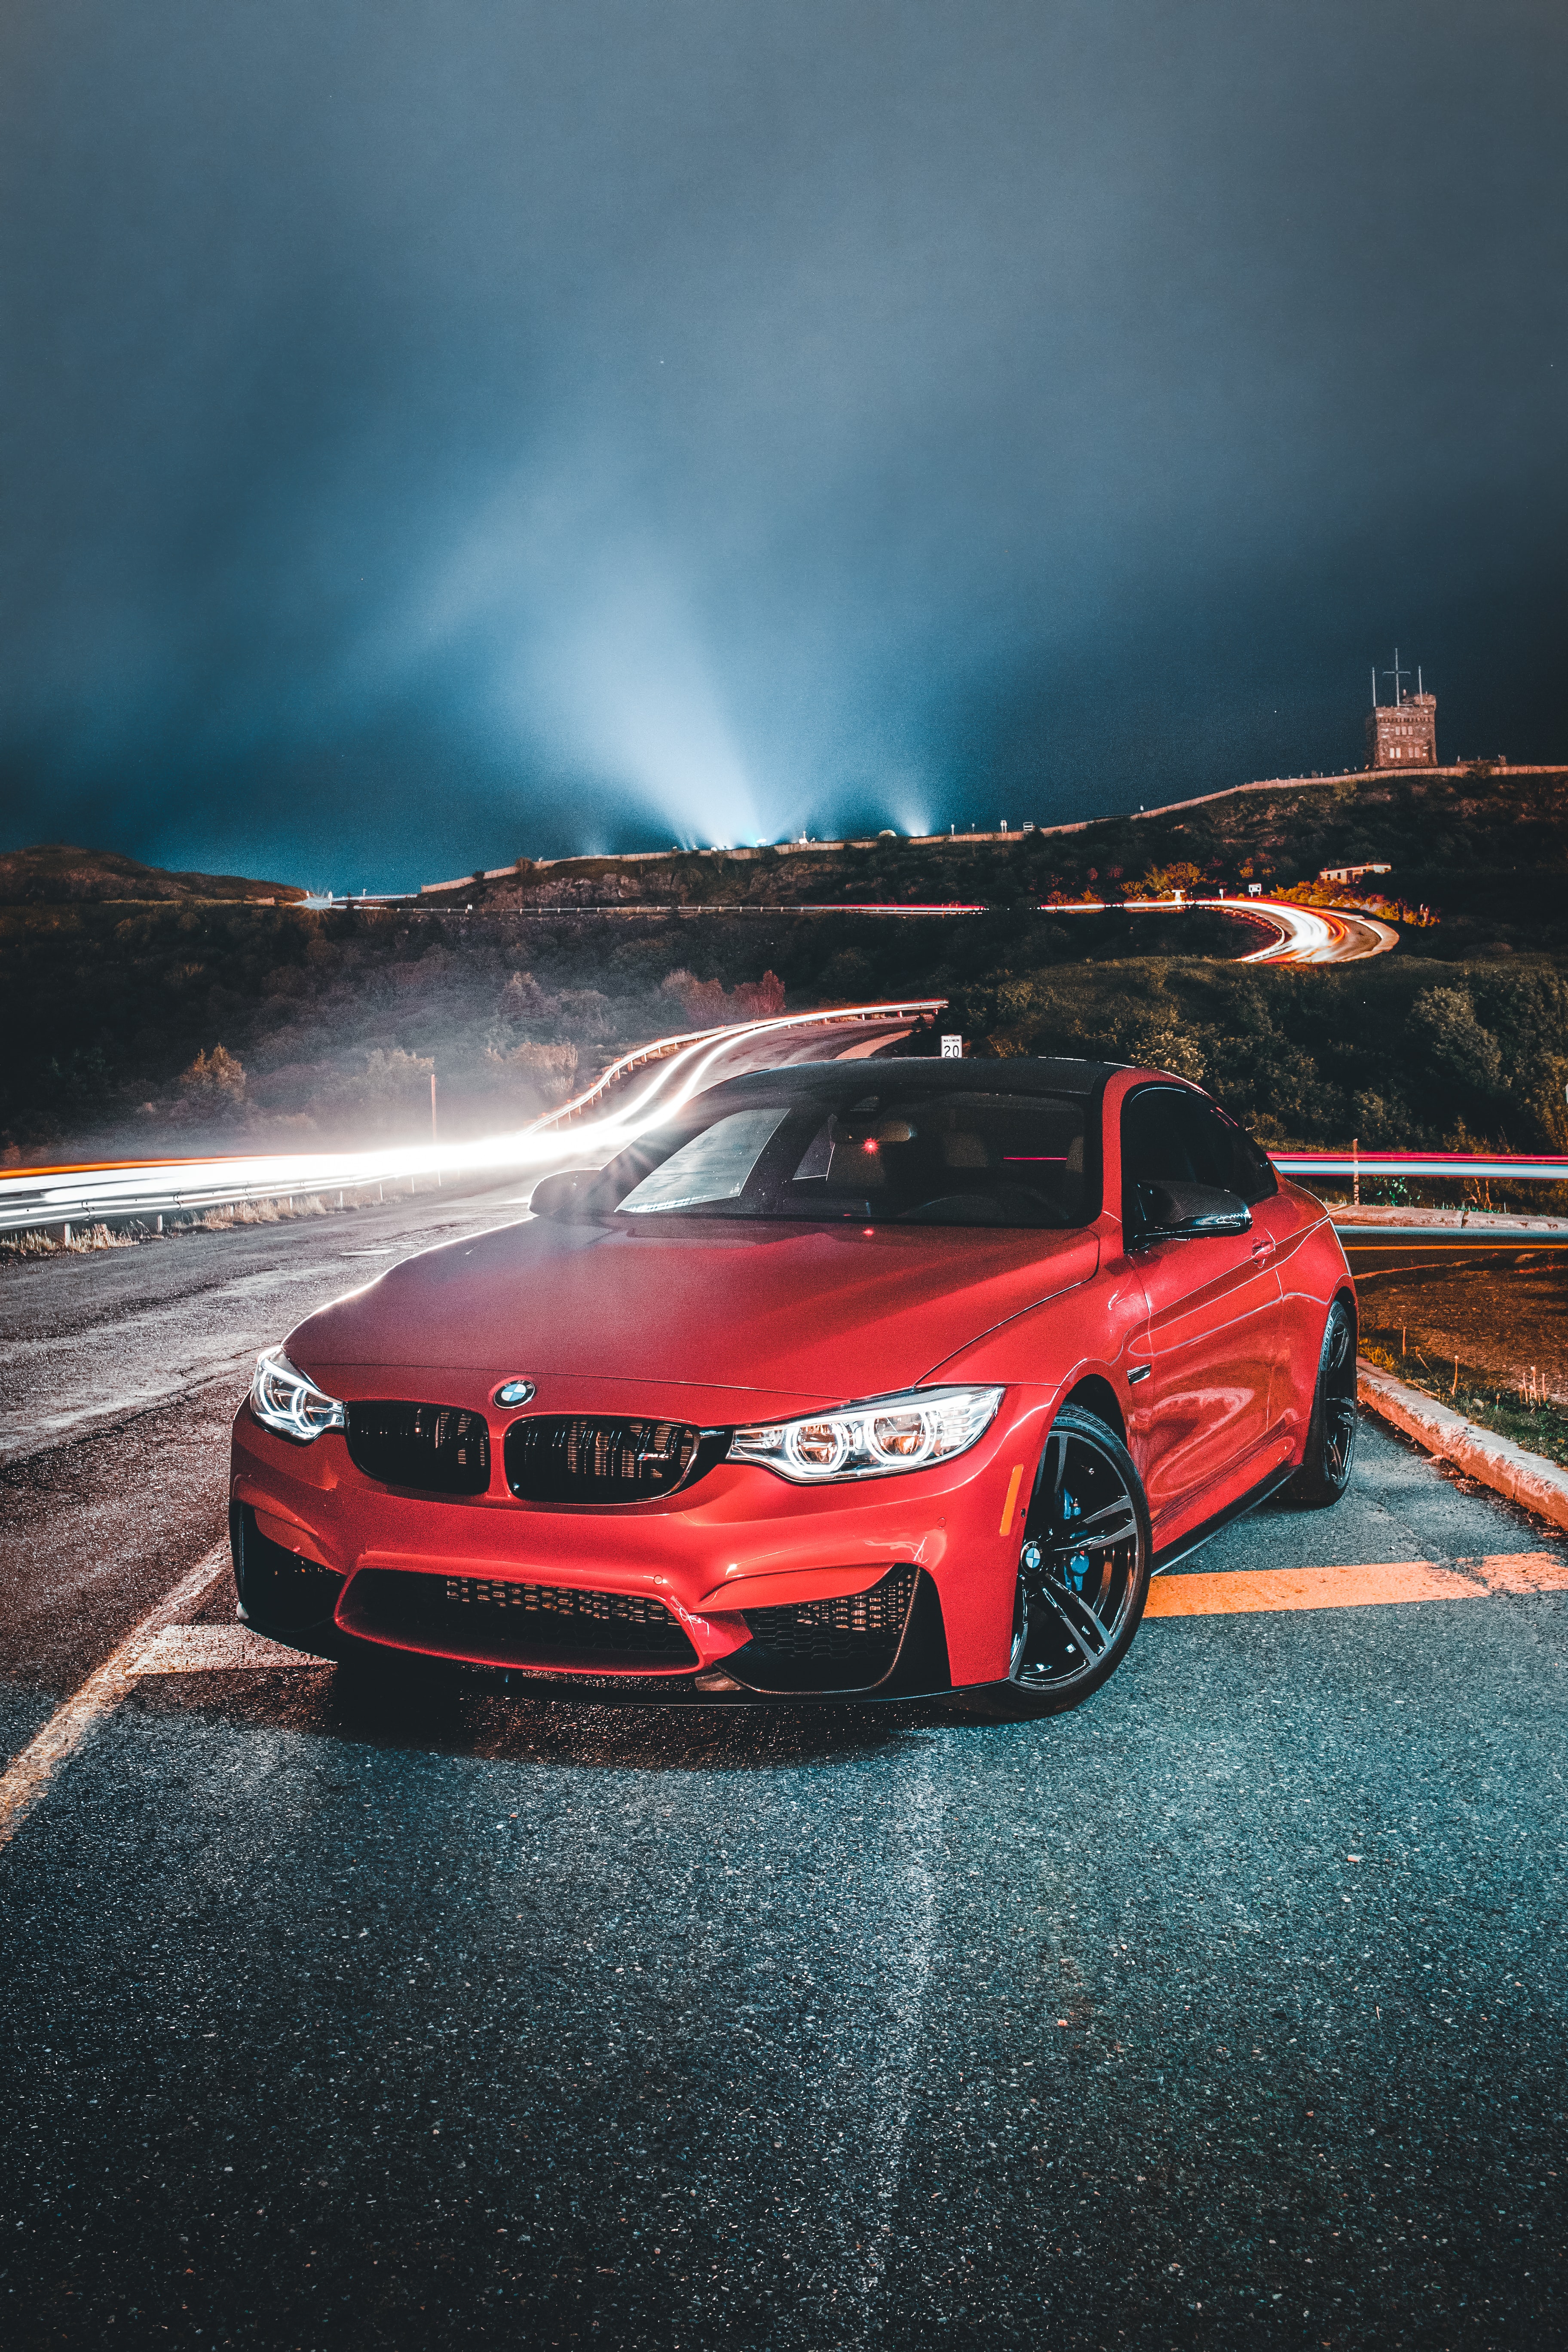 bmw, front view, cars, red, road, car, machine, bmw 320i